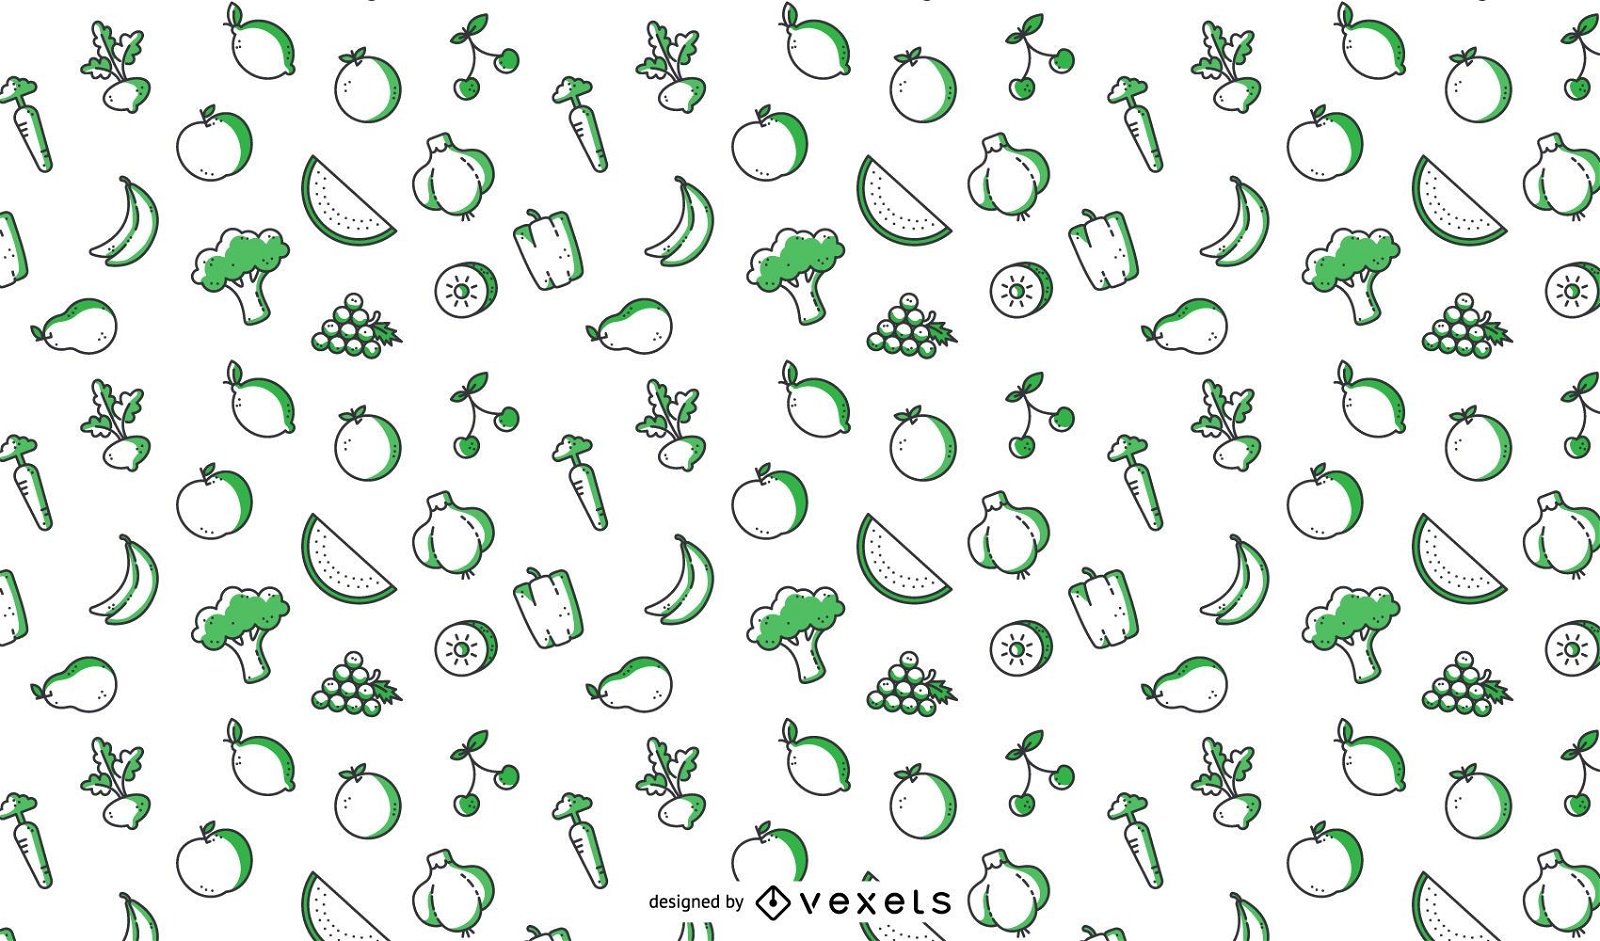 Illustrated fruit and vegetable pattern